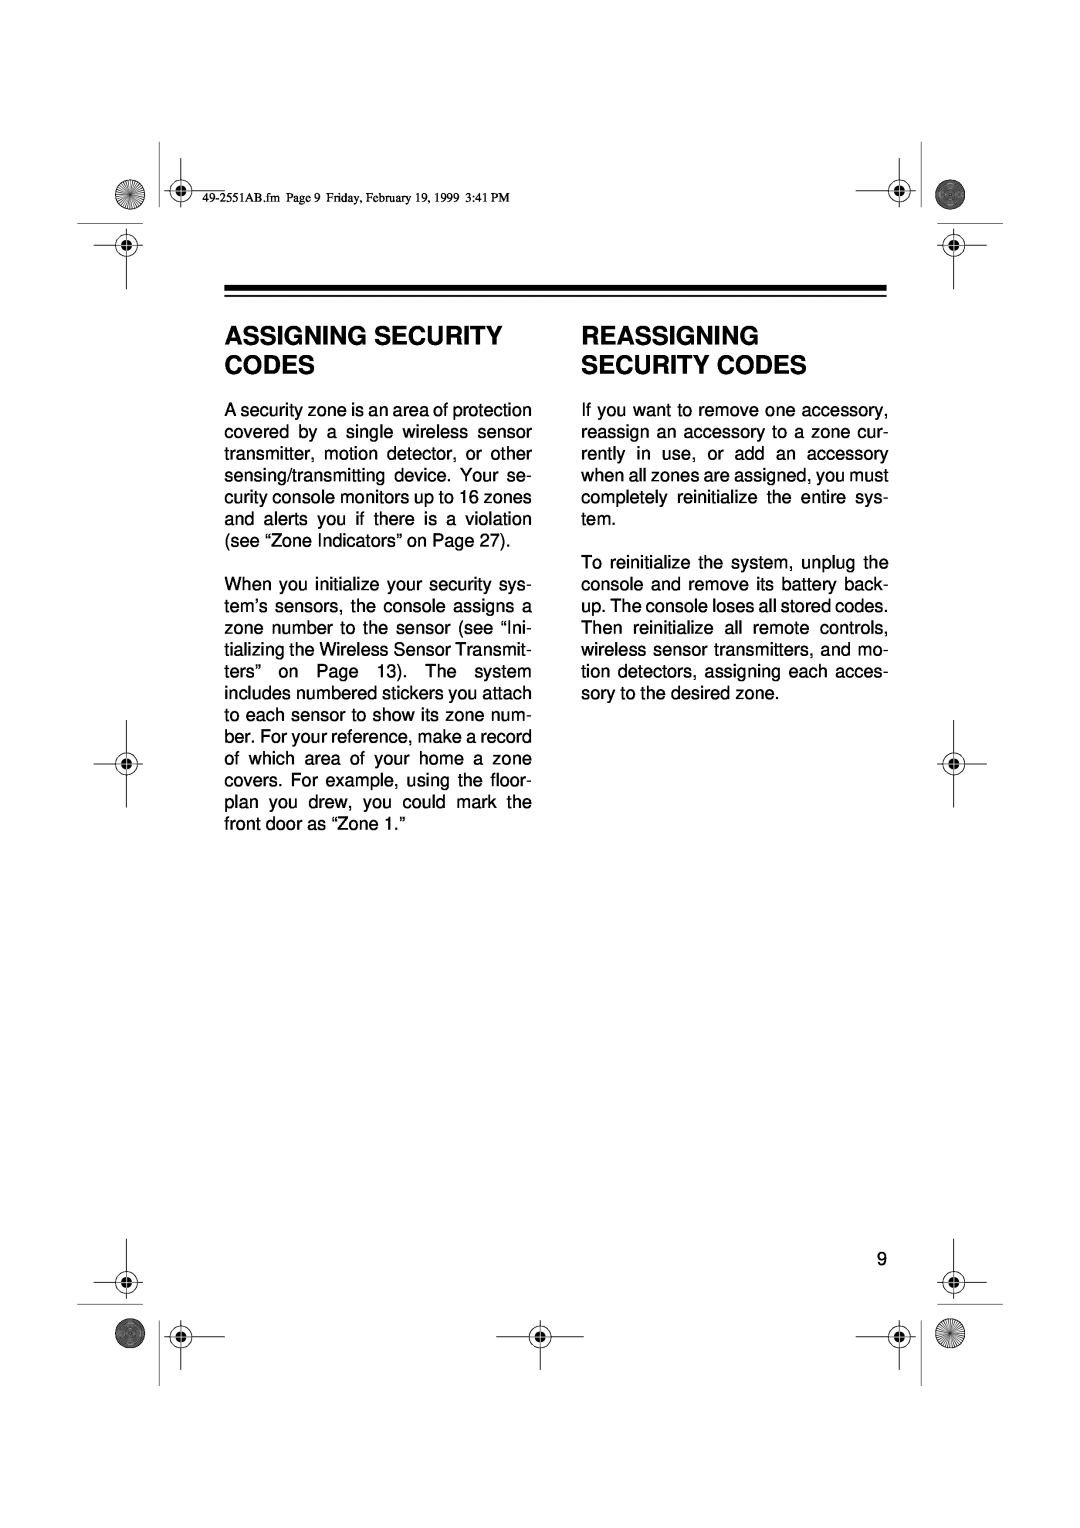 Radio Shack 49-2551A owner manual Assigning Security Codes, Reassigning Security Codes 